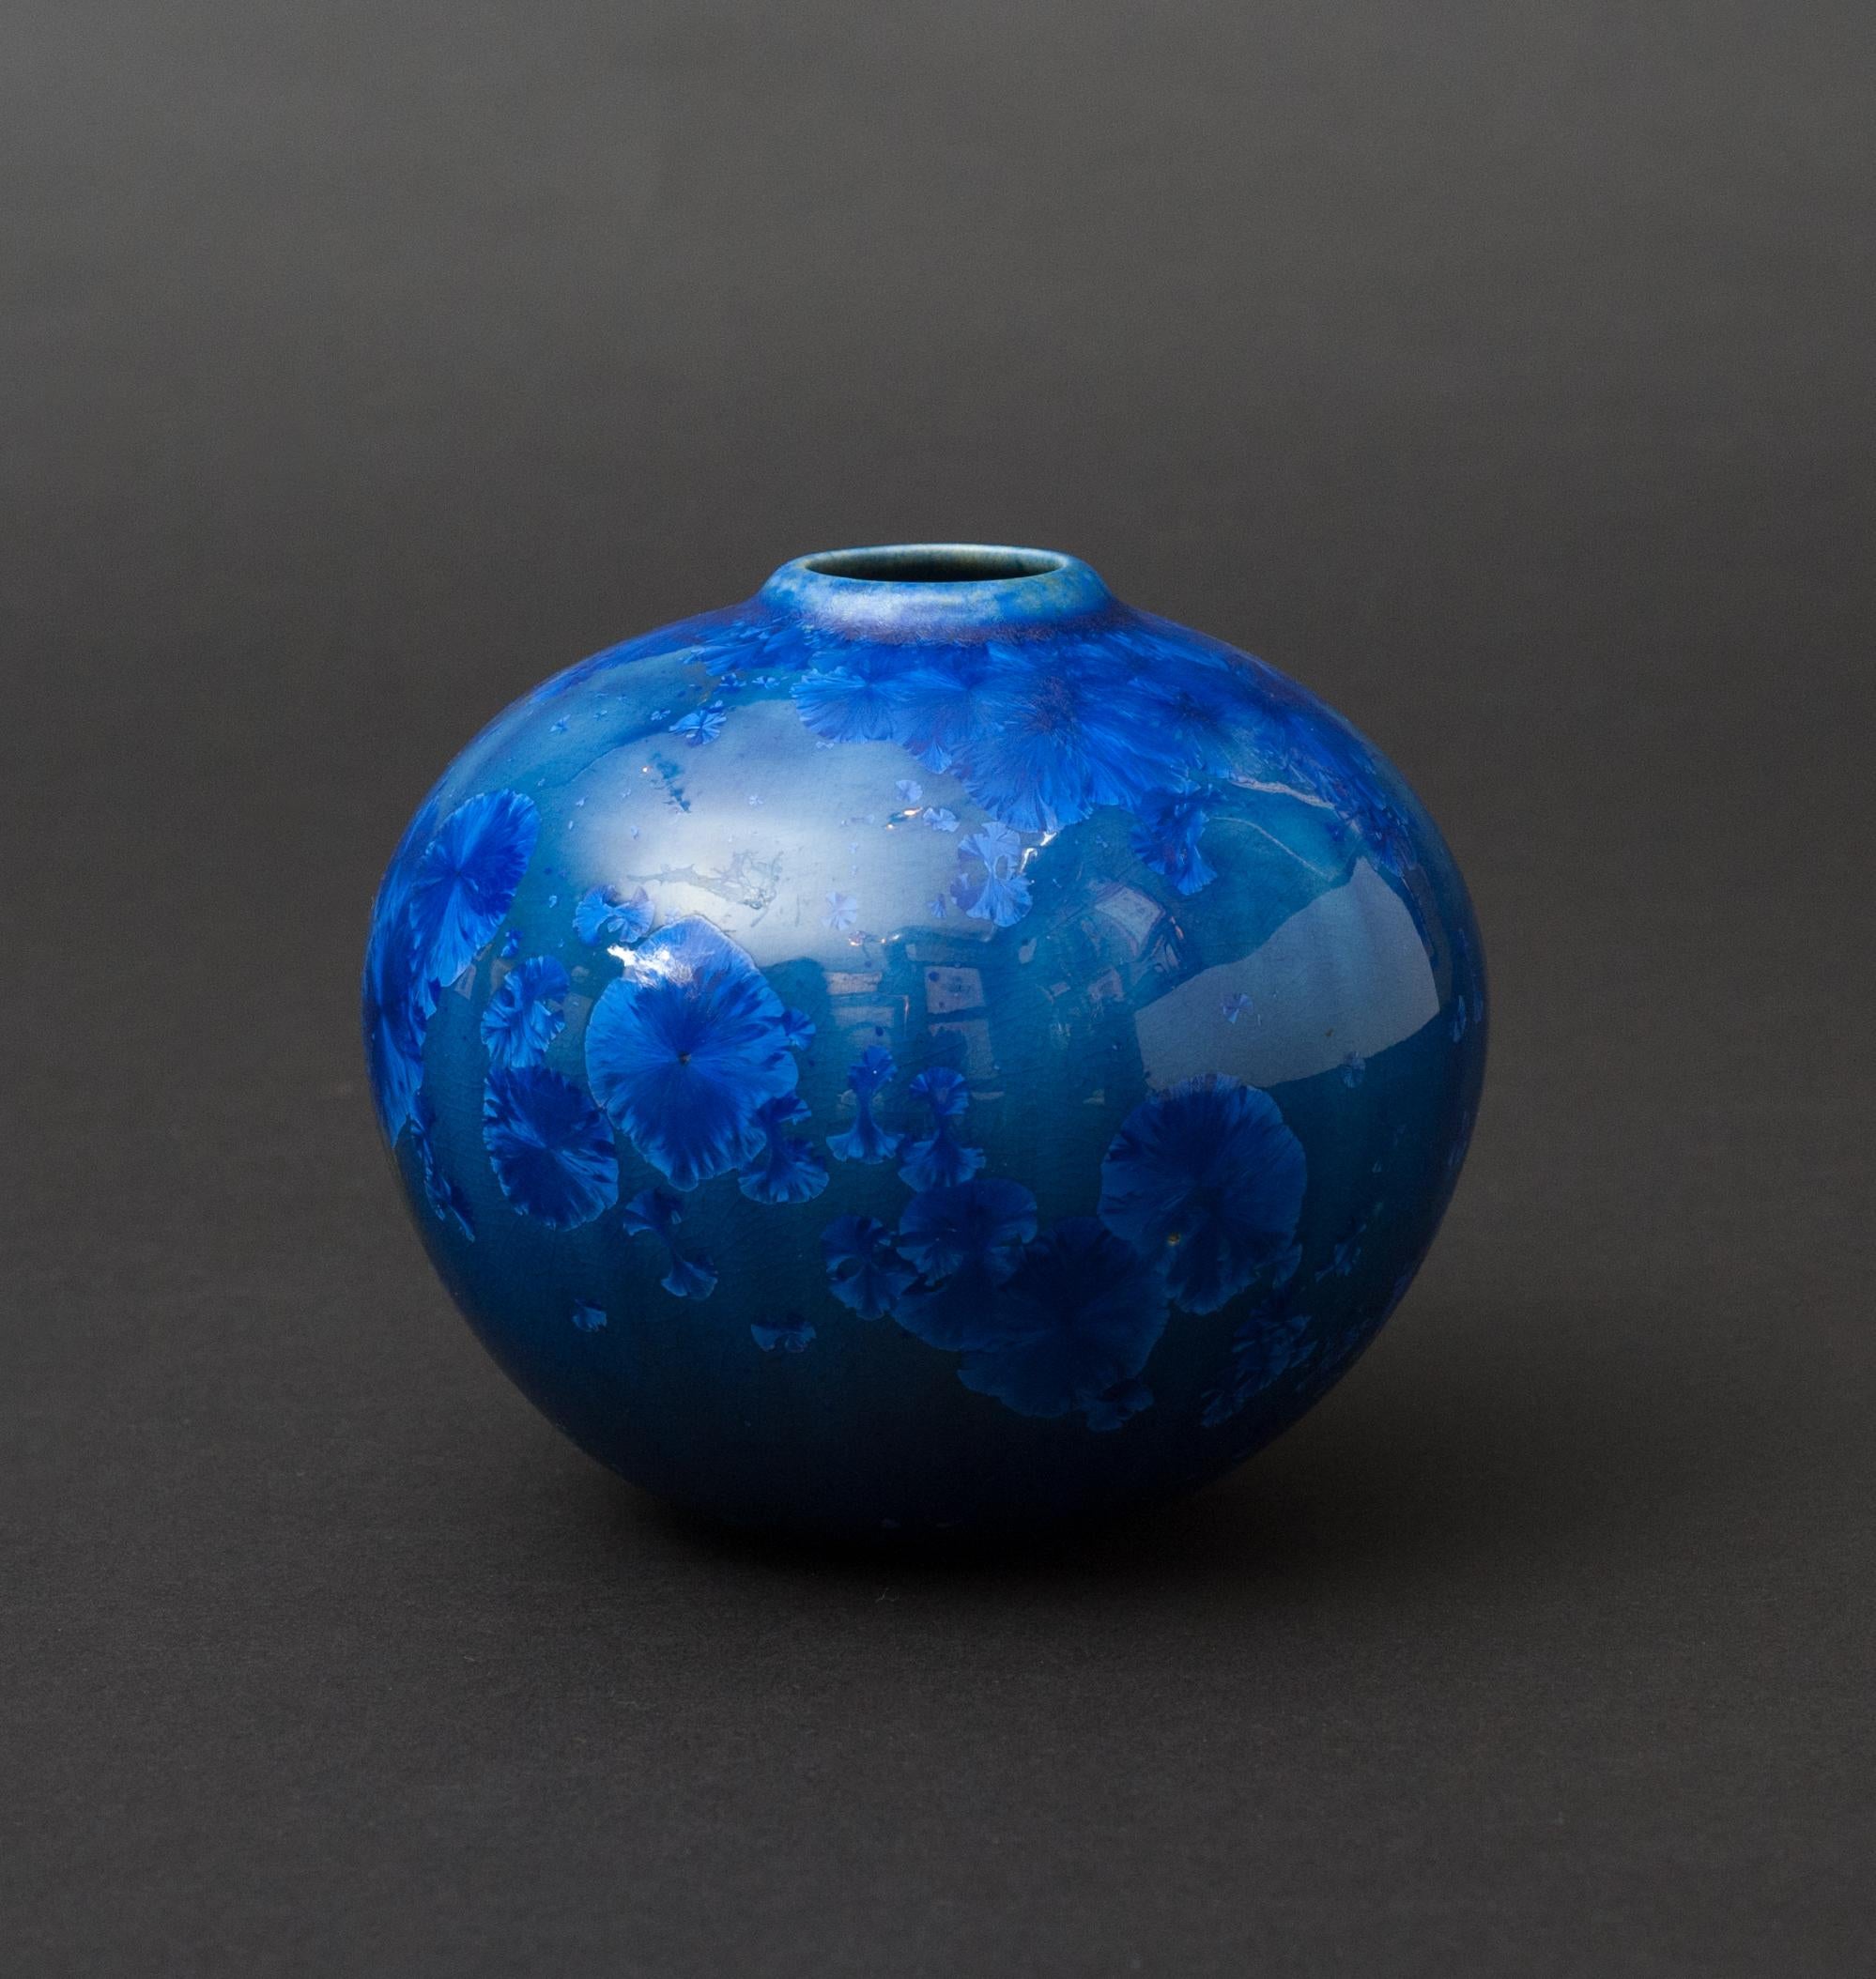 “A Robineau vase is a true work of art, unique in conception and perfect in execution, for every piece that left this studio was a labor of love.” – Ethel Brand Wise, The American Magazine of Art, 1929

Adelaide Alsop Robineau was a pioneer in